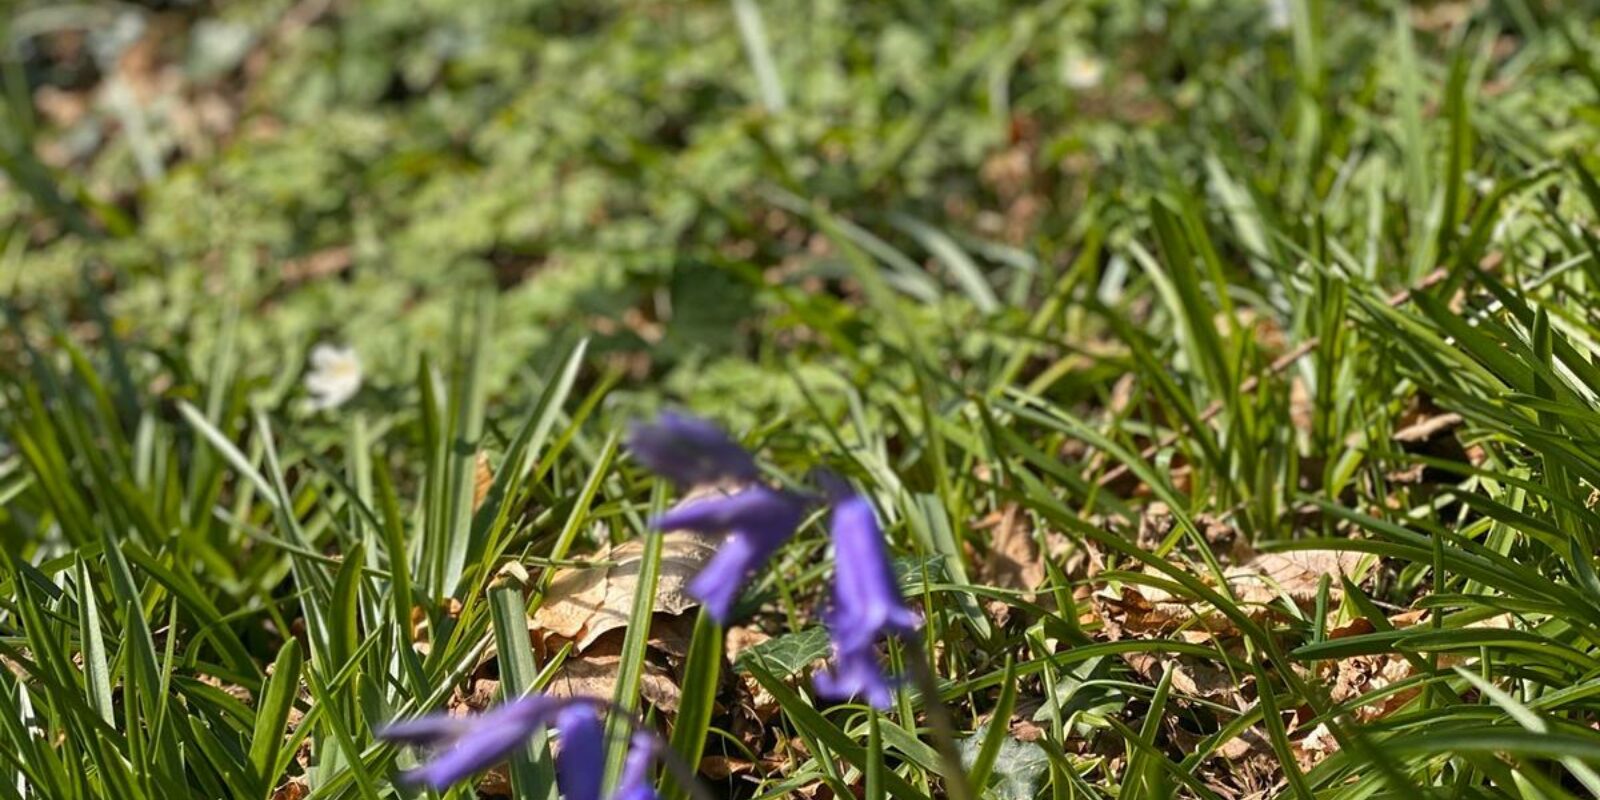 Bluebells start to appear as spring arrives in the woods